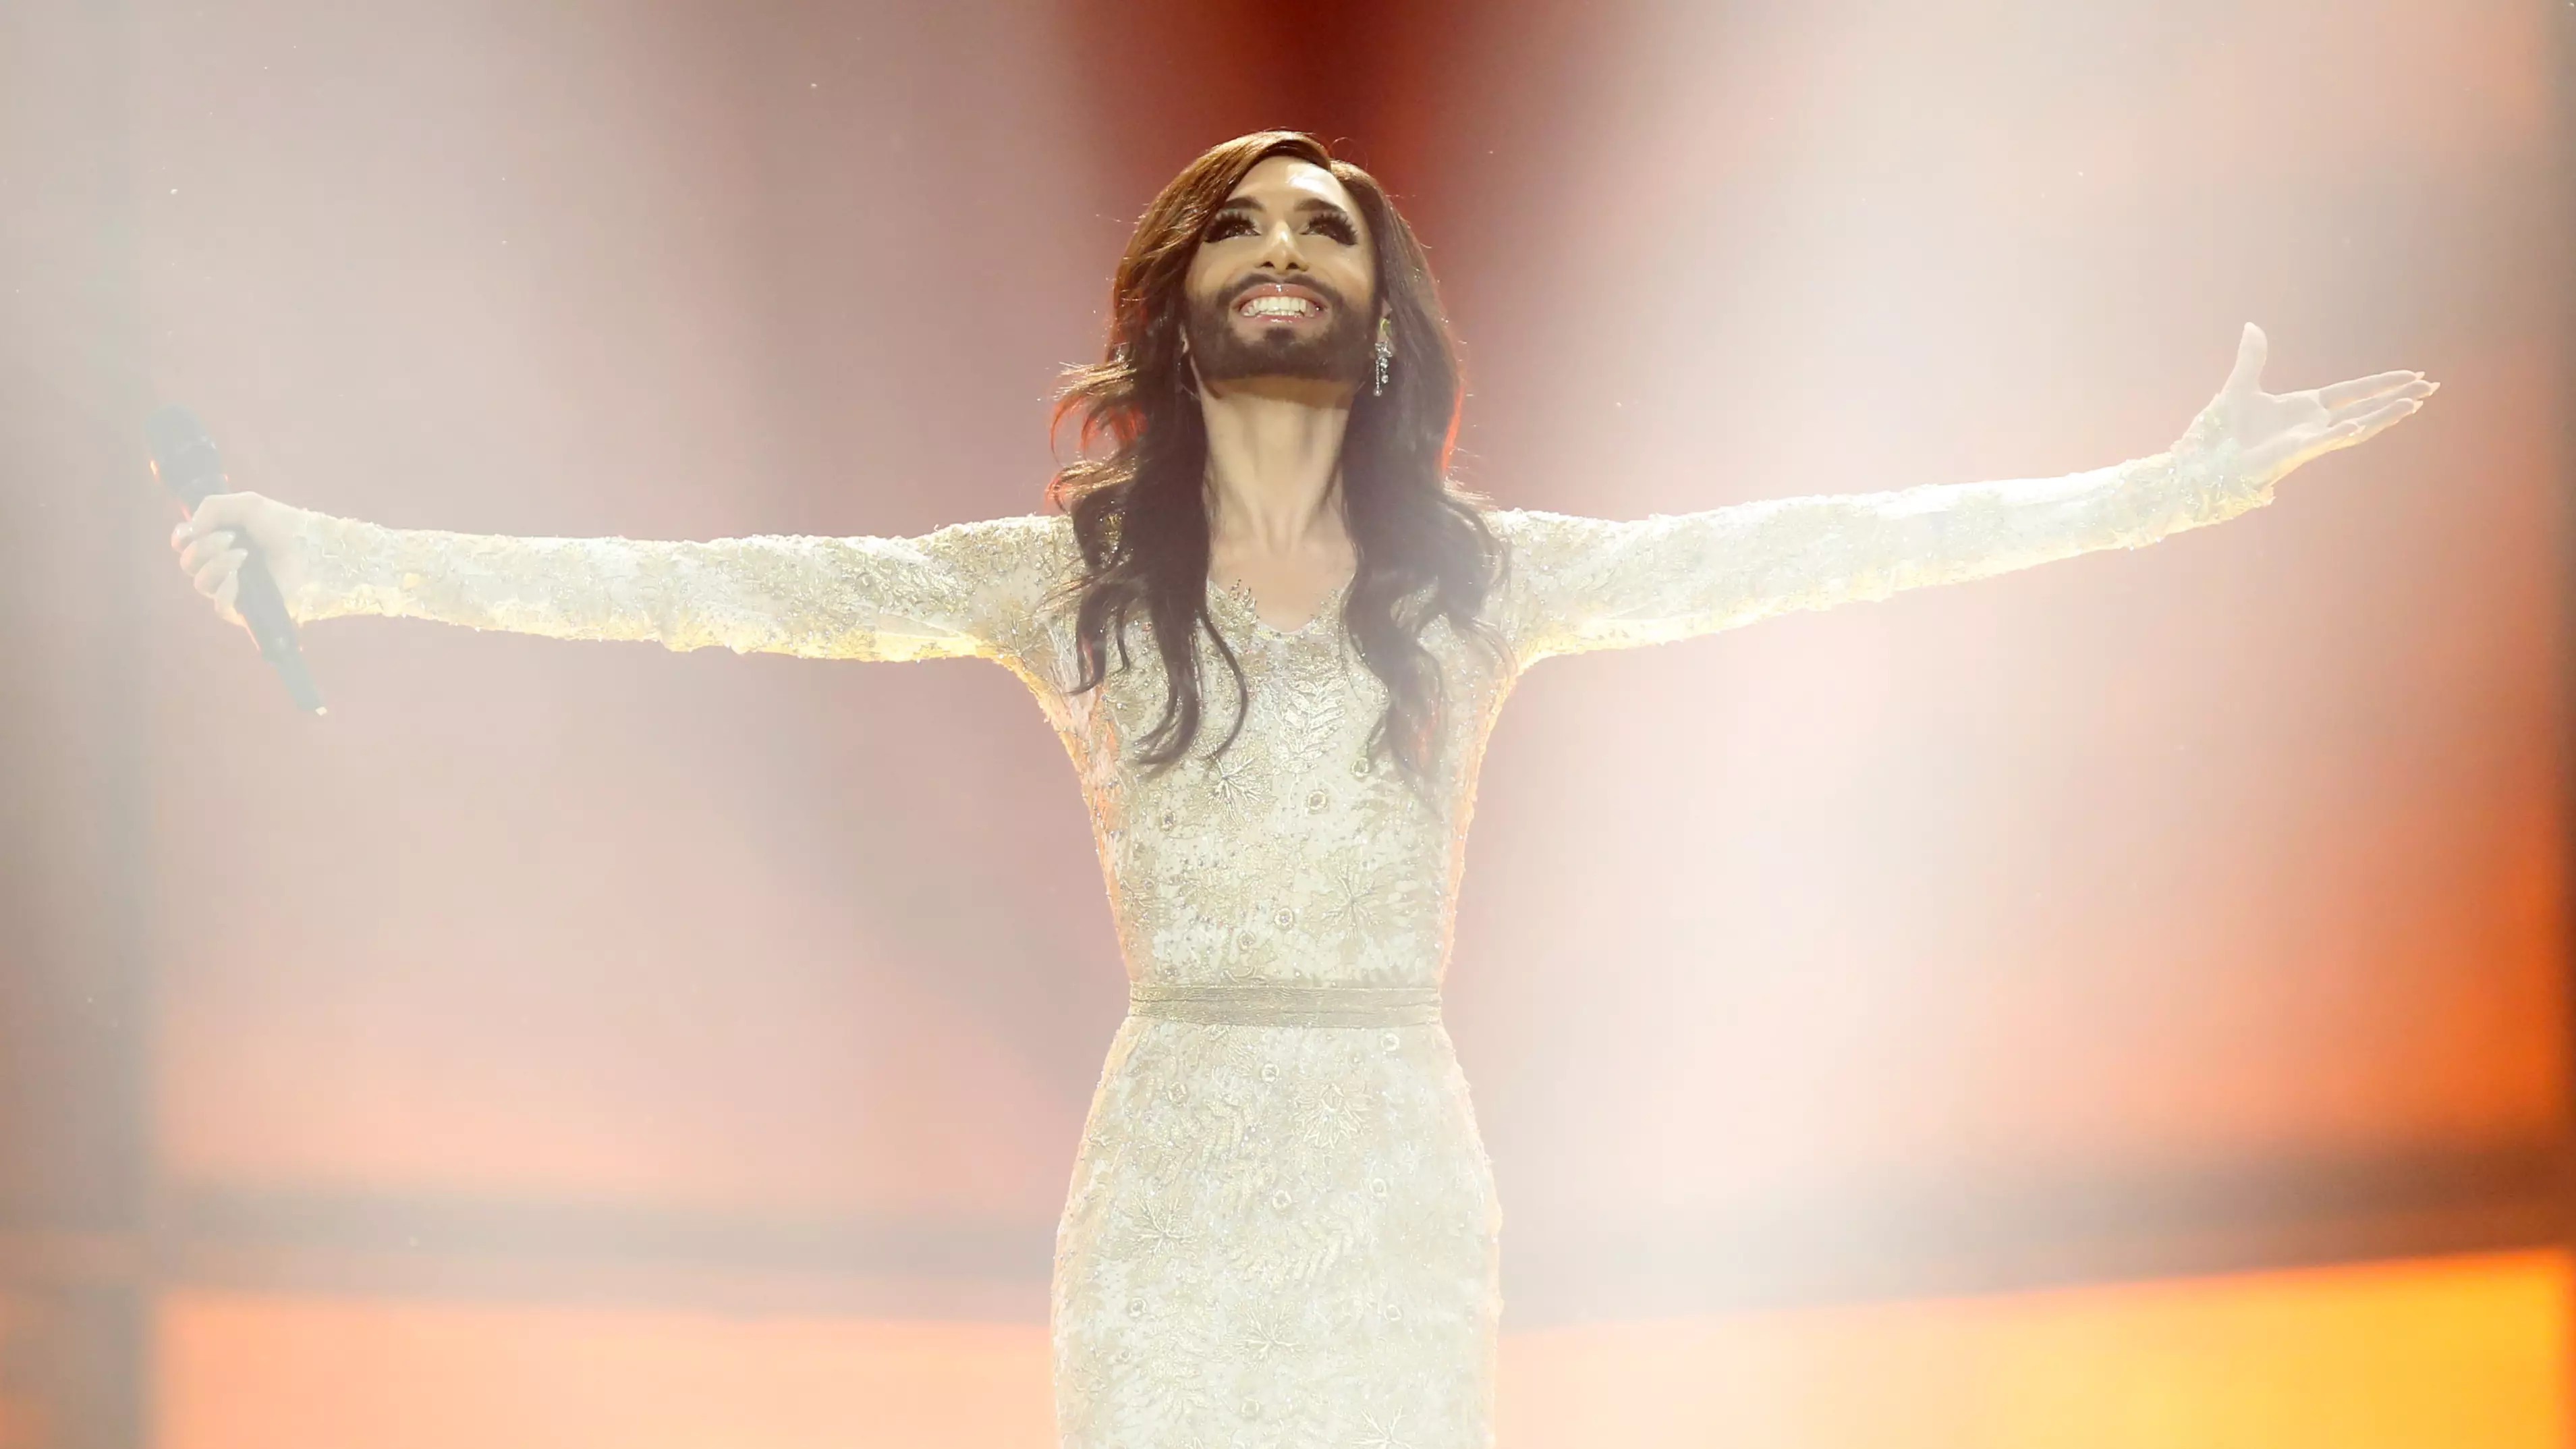 Eurovision's Conchita Wurst Completely Changed Look For Music Video 